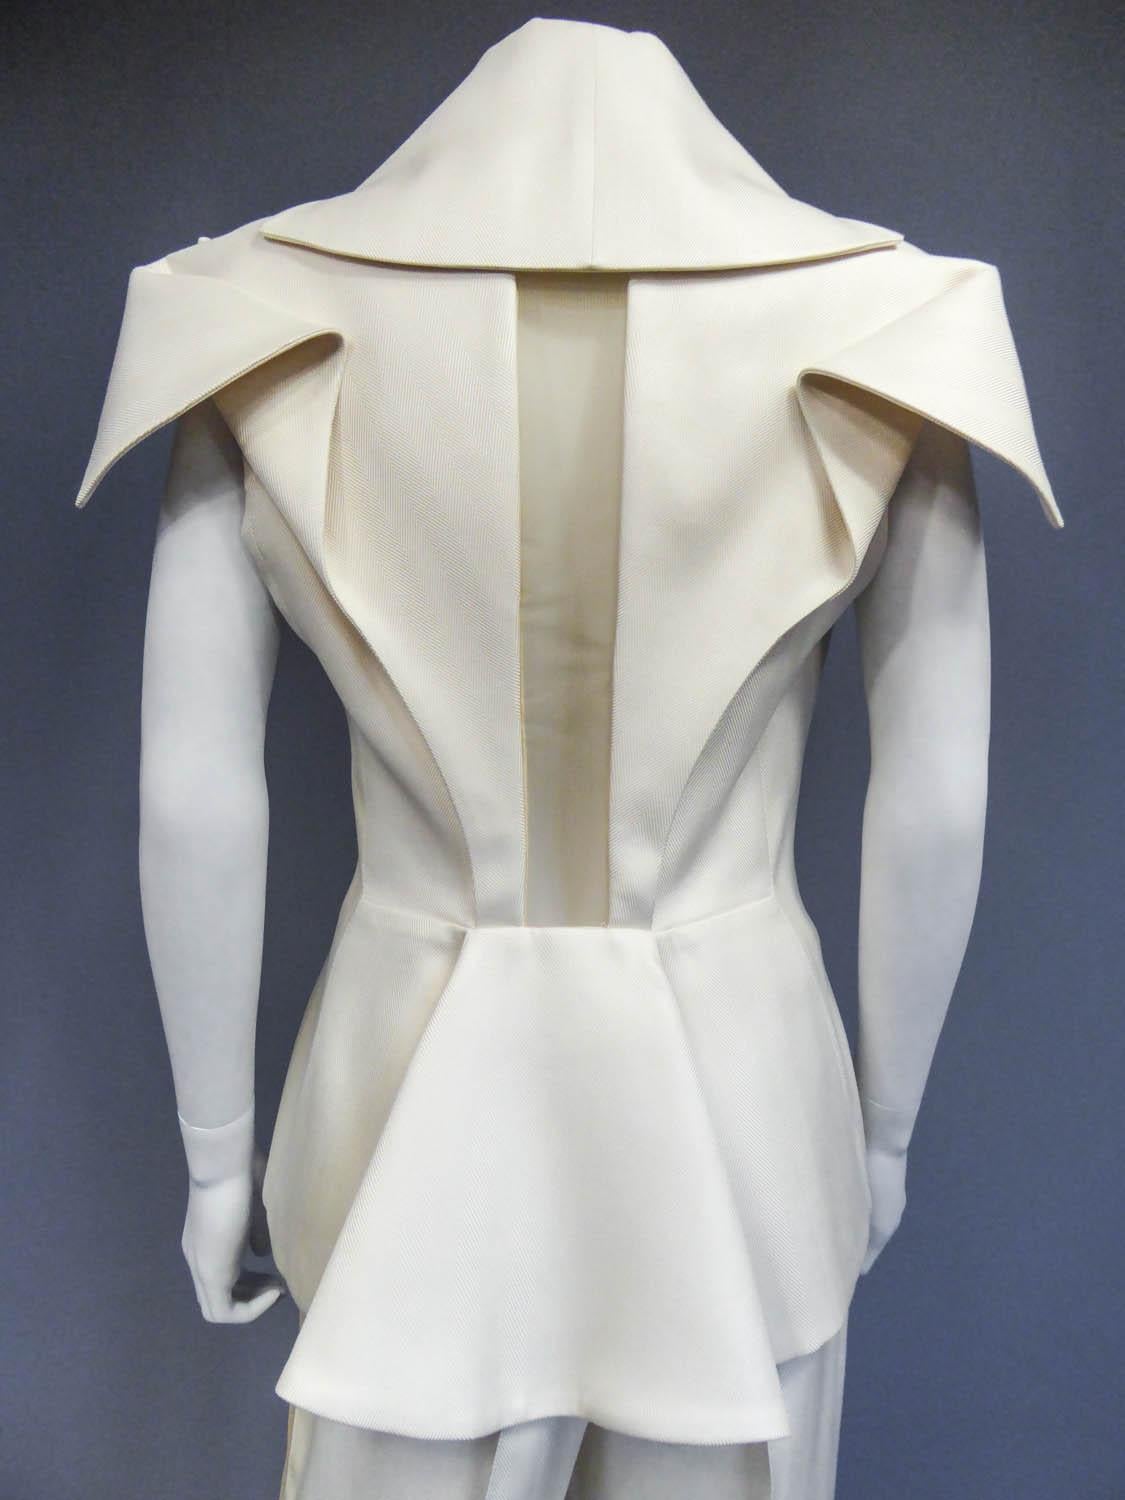 Circa 2000

England

Alexander Mcqueen jacket and trousers suit in cream silk twill. The originality of this set is characterized by the back cut of the jacket, openwork in the center, and marked by large lapels on the shoulders and a folded back